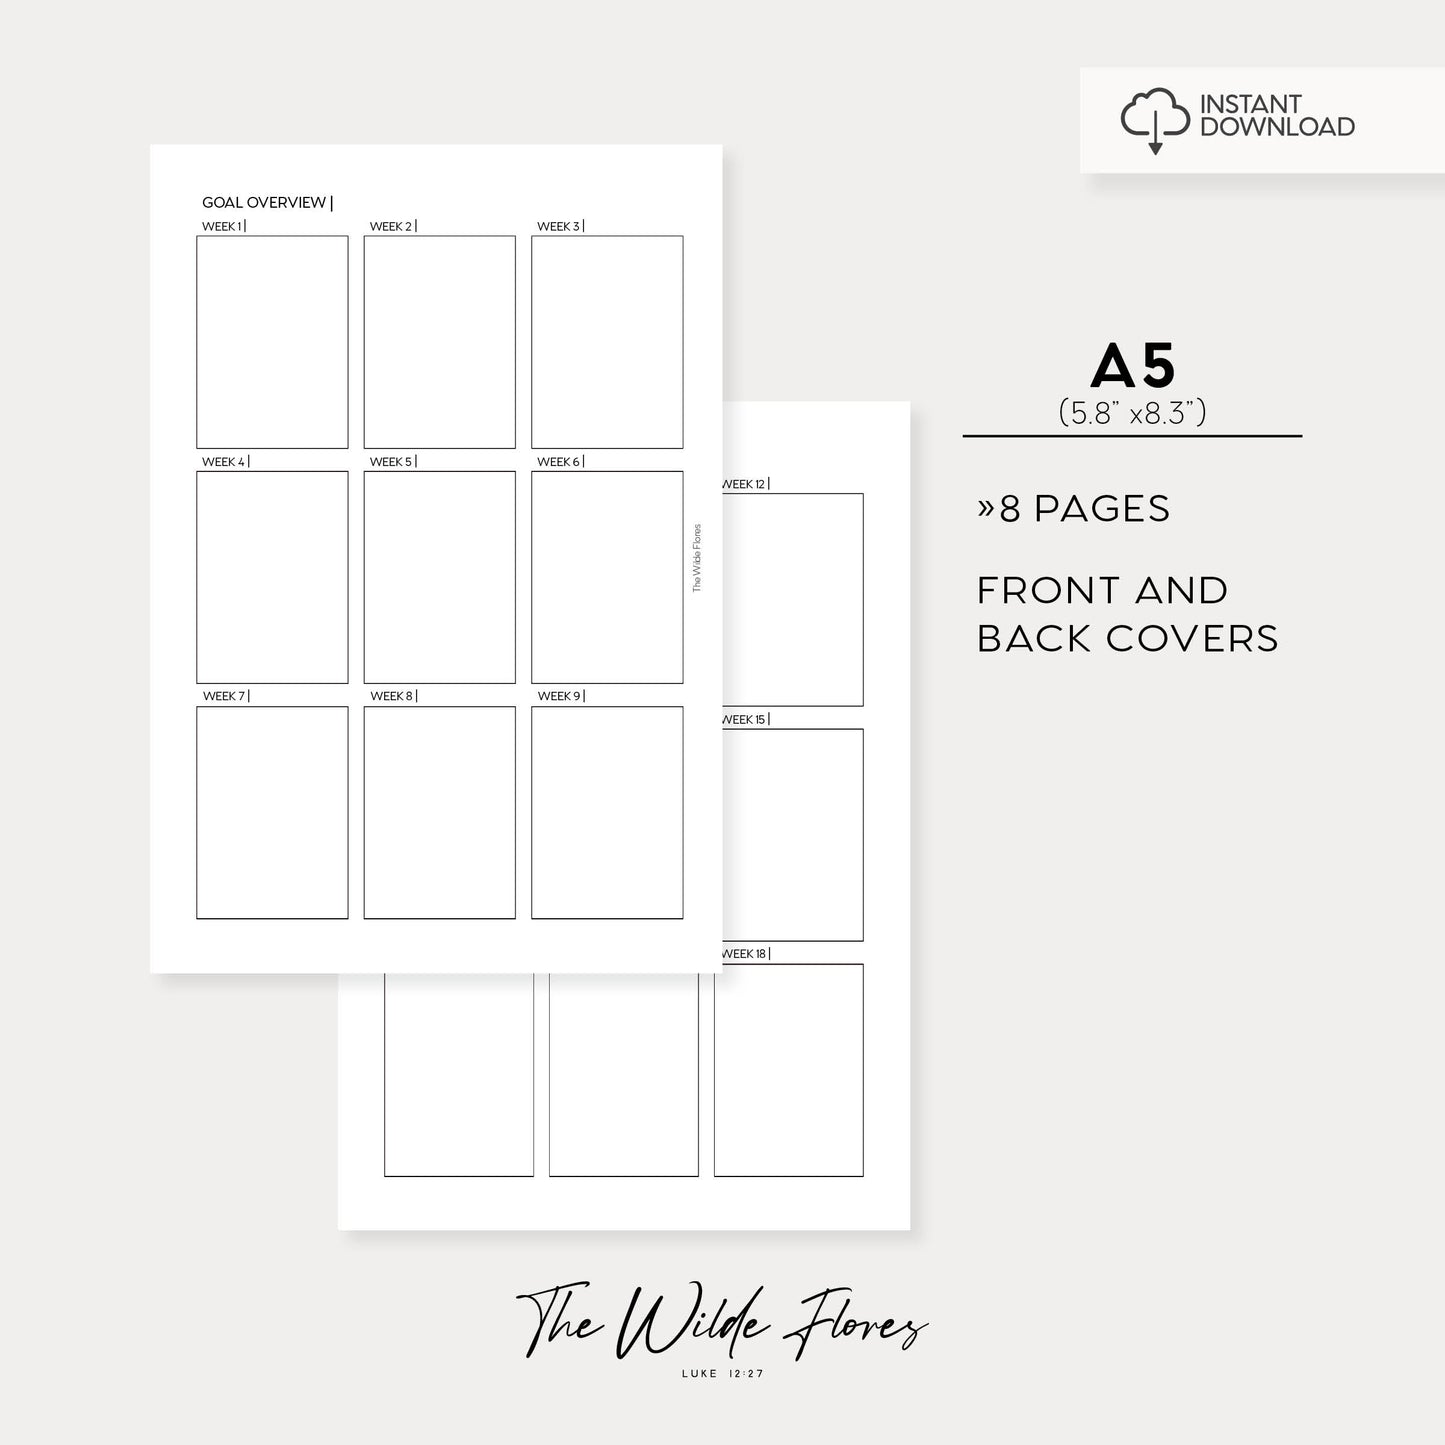 52 Week Goal Planner: A5 Size Printable